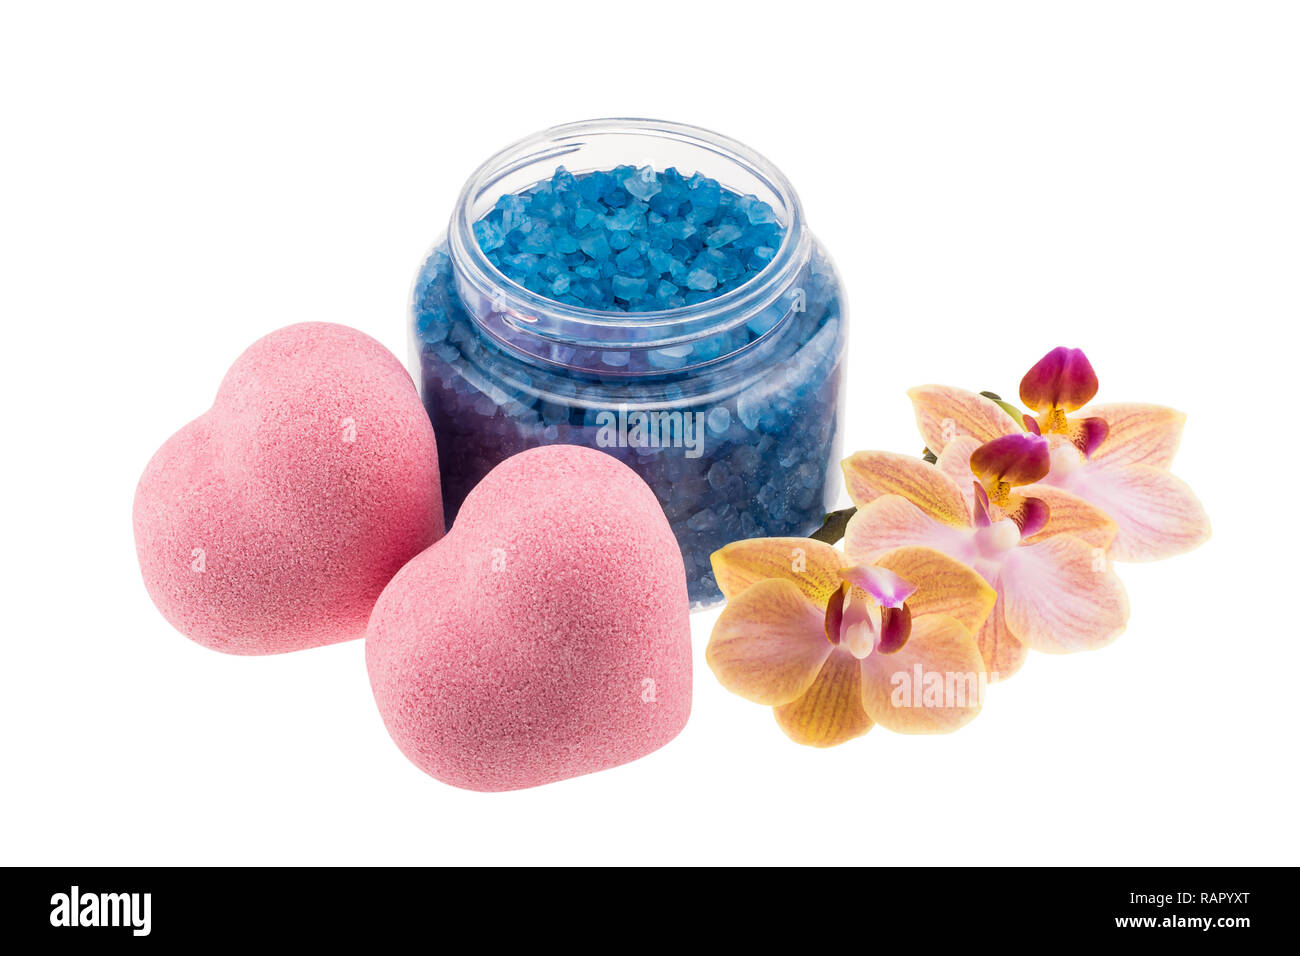 Composition of heart-shaped bath bombs, open bottle with blue sea salt and orchid flower Stock Photo